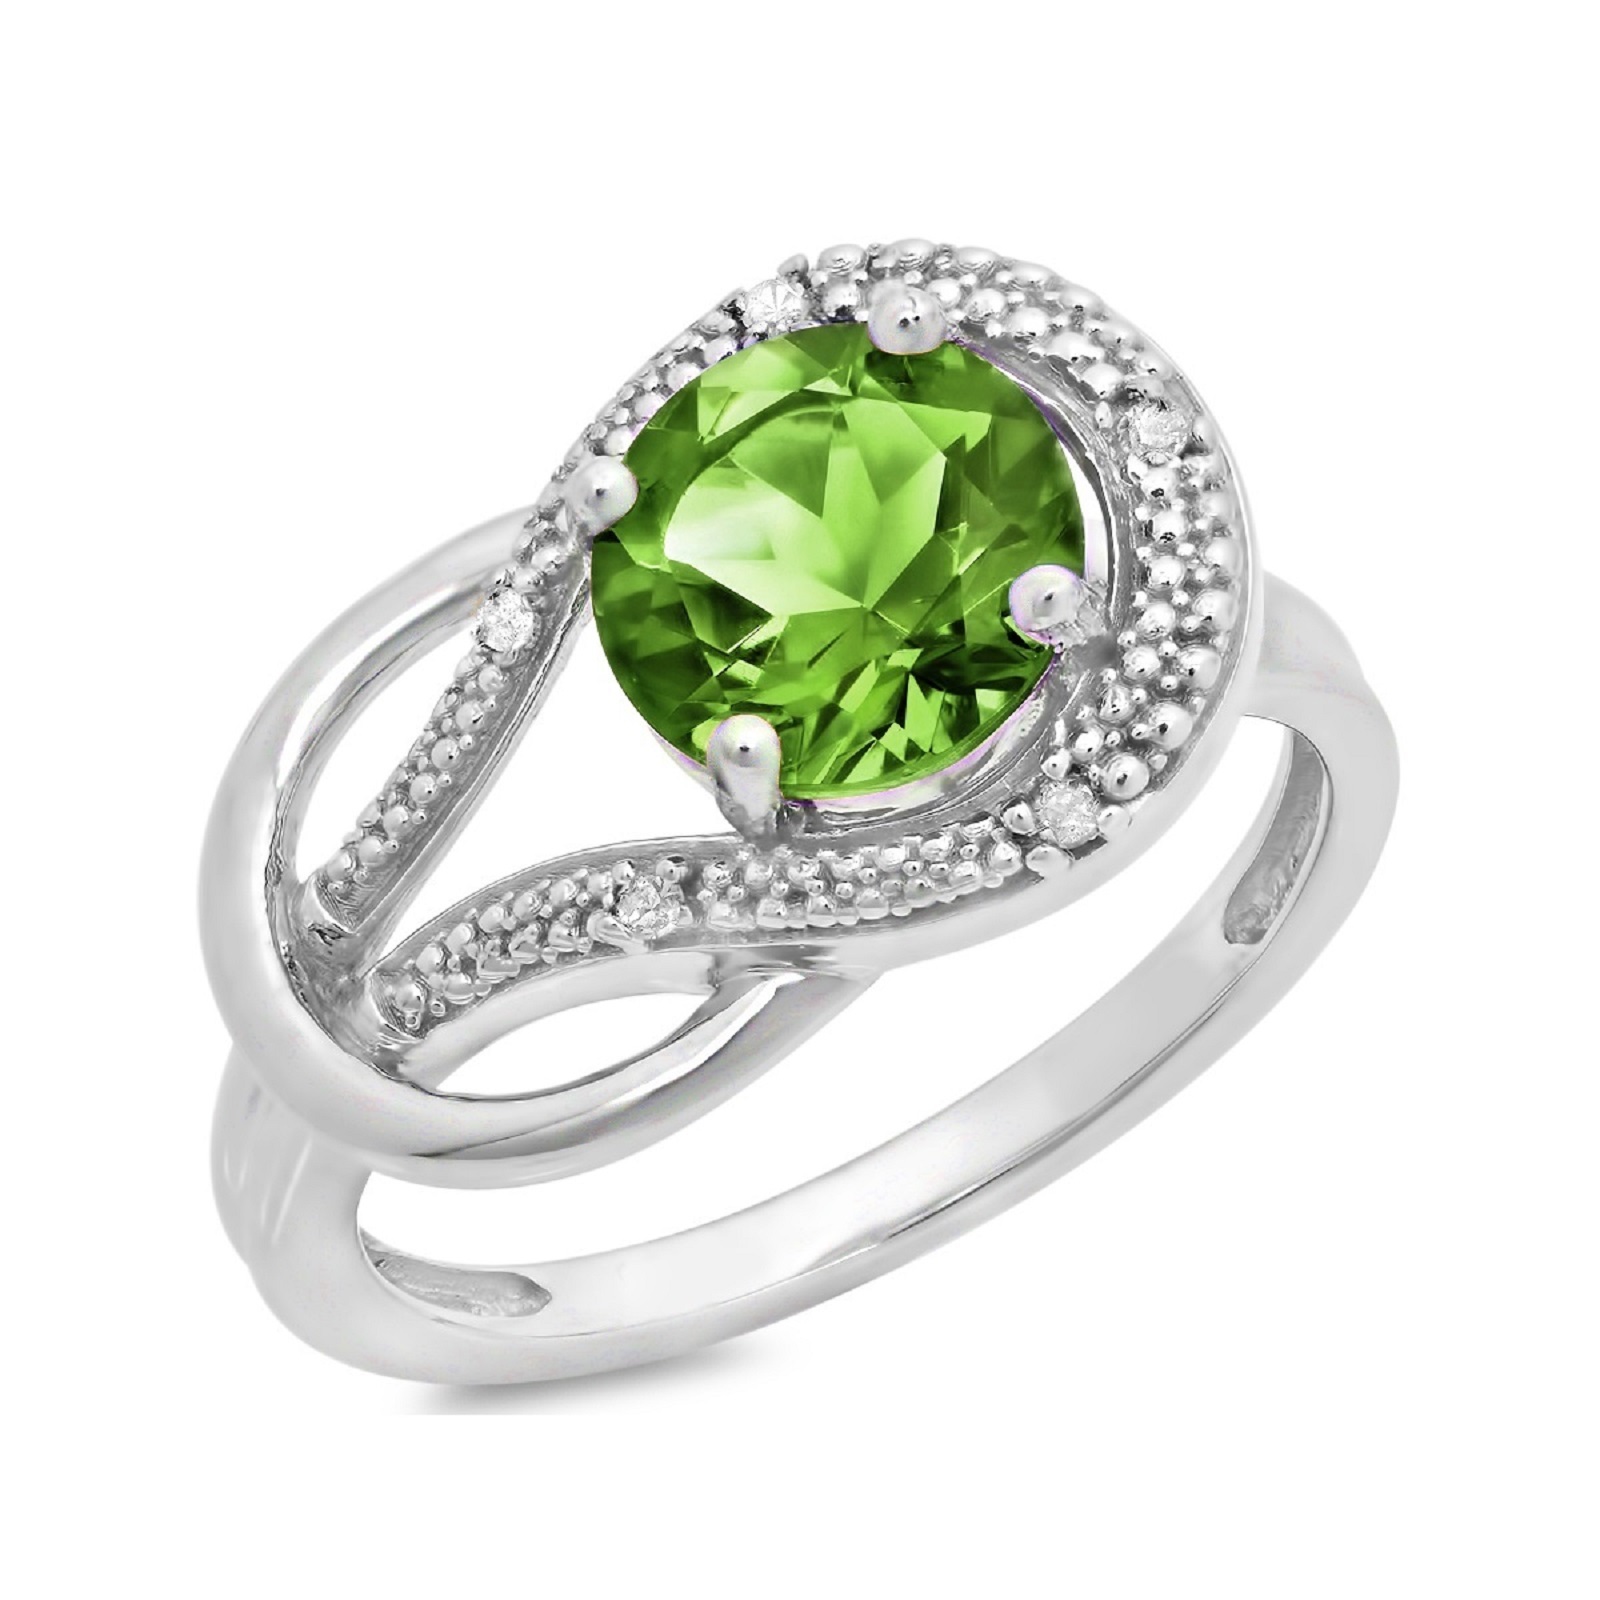 10KT White Gold 8mm Round Peridot and Diamond Accent Love Knot Ring (0.03 cttw, Size 7)